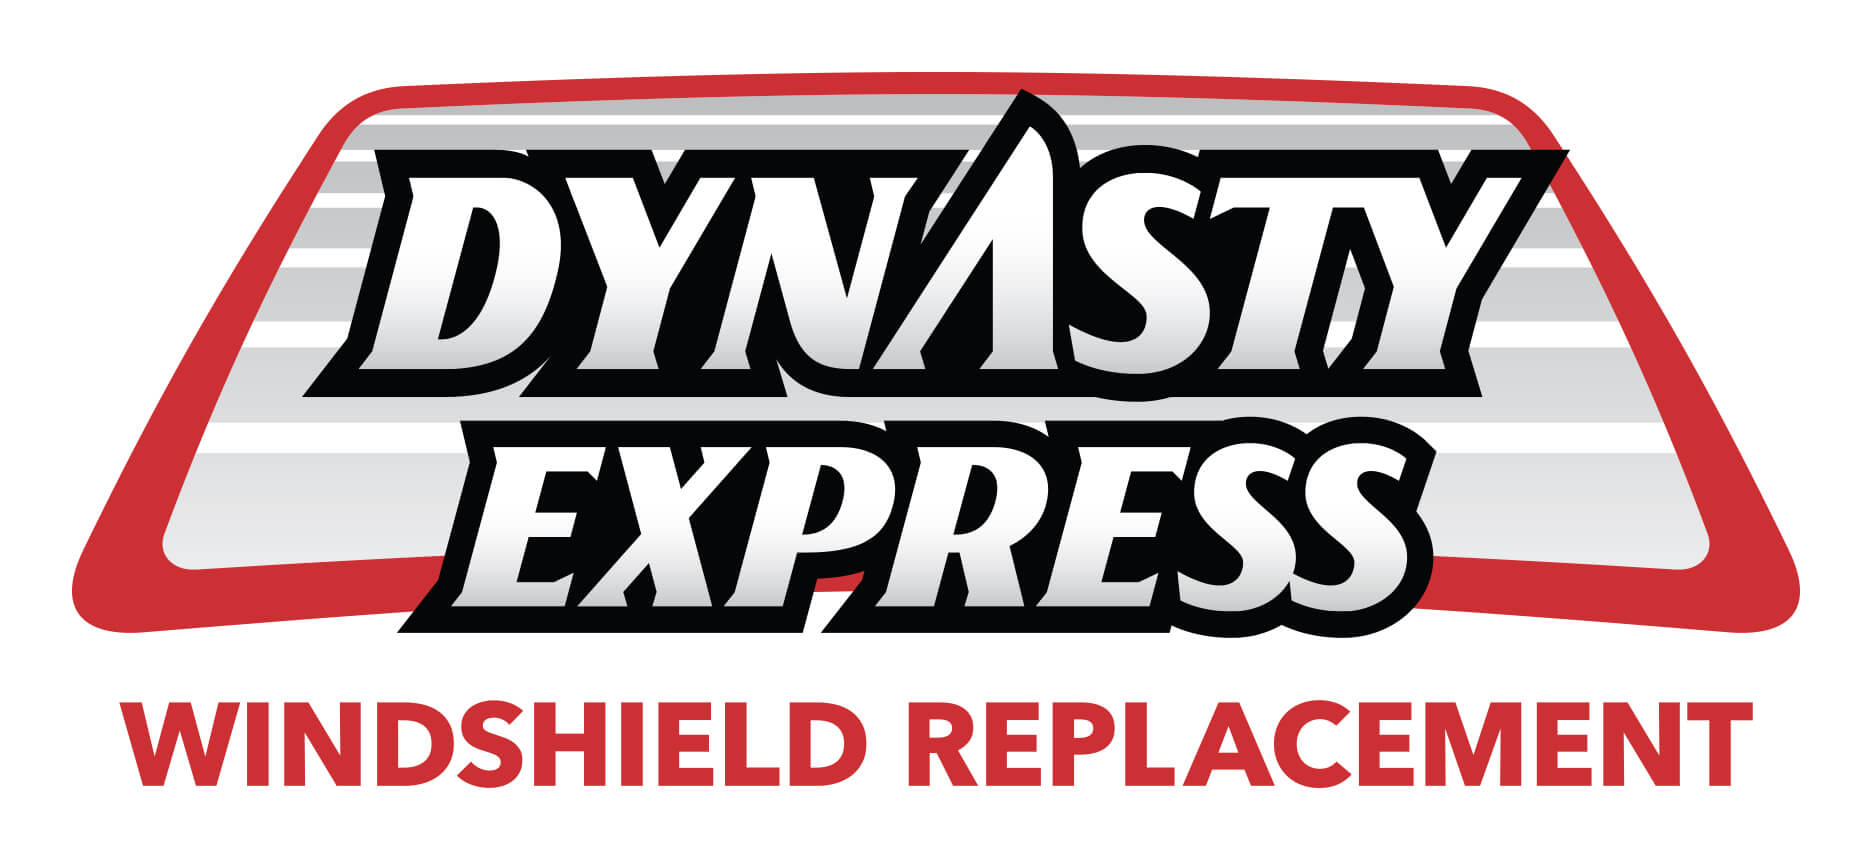 dynasty express windshield replacement logo